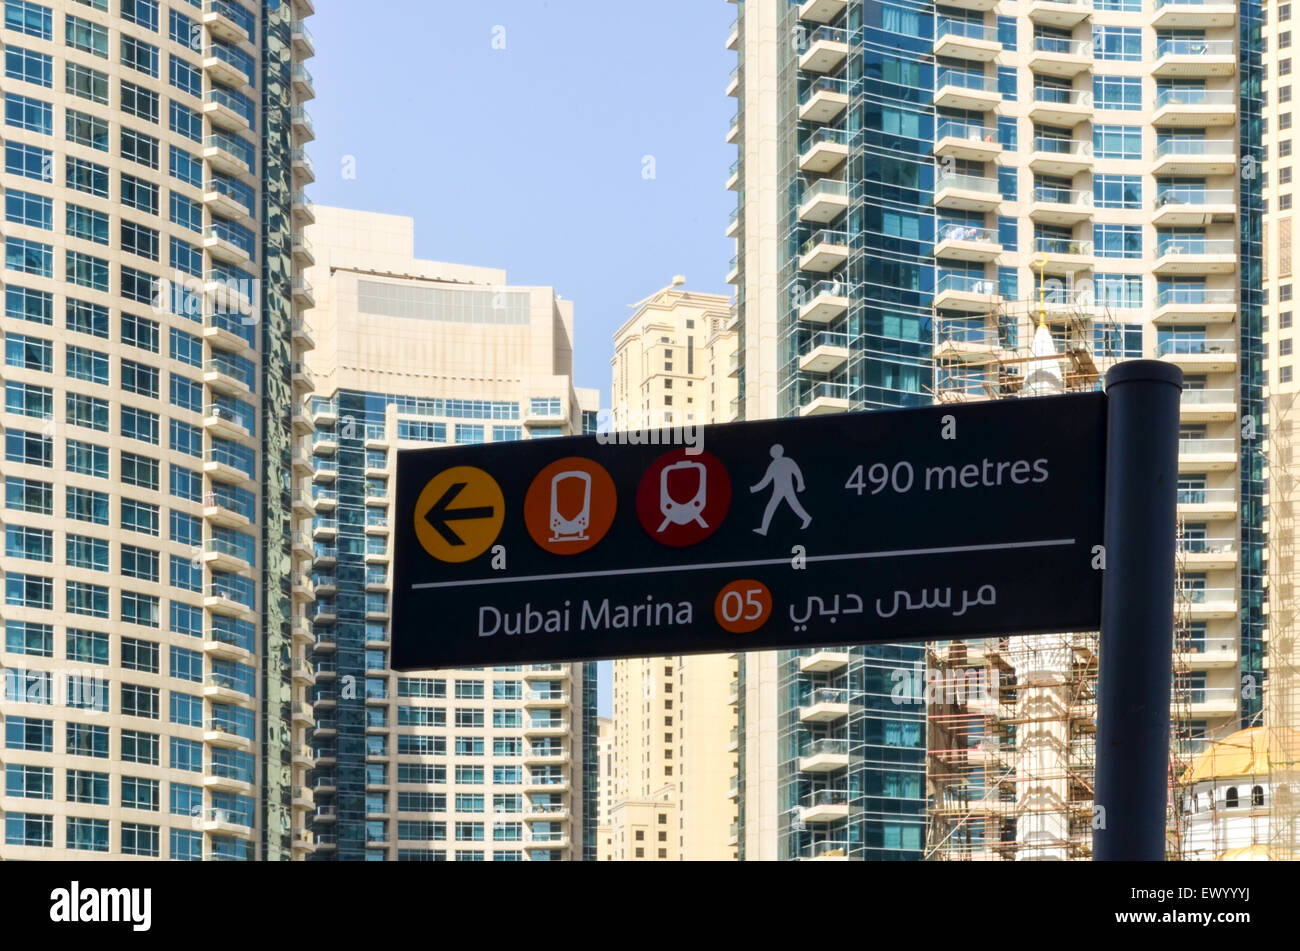 Metro station sign distance and background of high rise buildings, towers and hotels of the Dubai Marina, United Arab Emirates Stock Photo